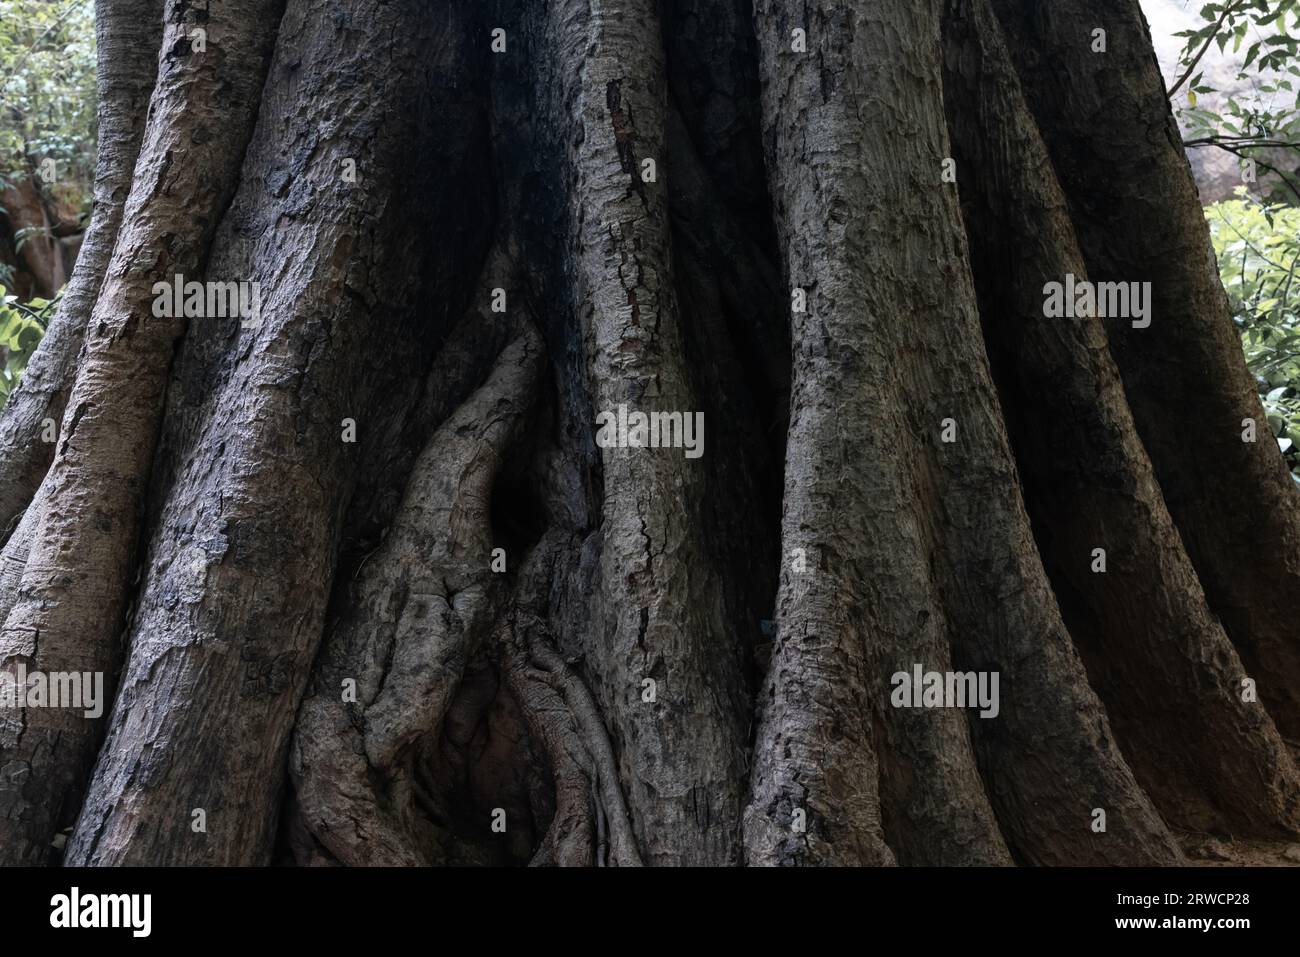 Sacred banyan tree with massive roots. The power of nature. Save trees. Ecology. Stock Photo